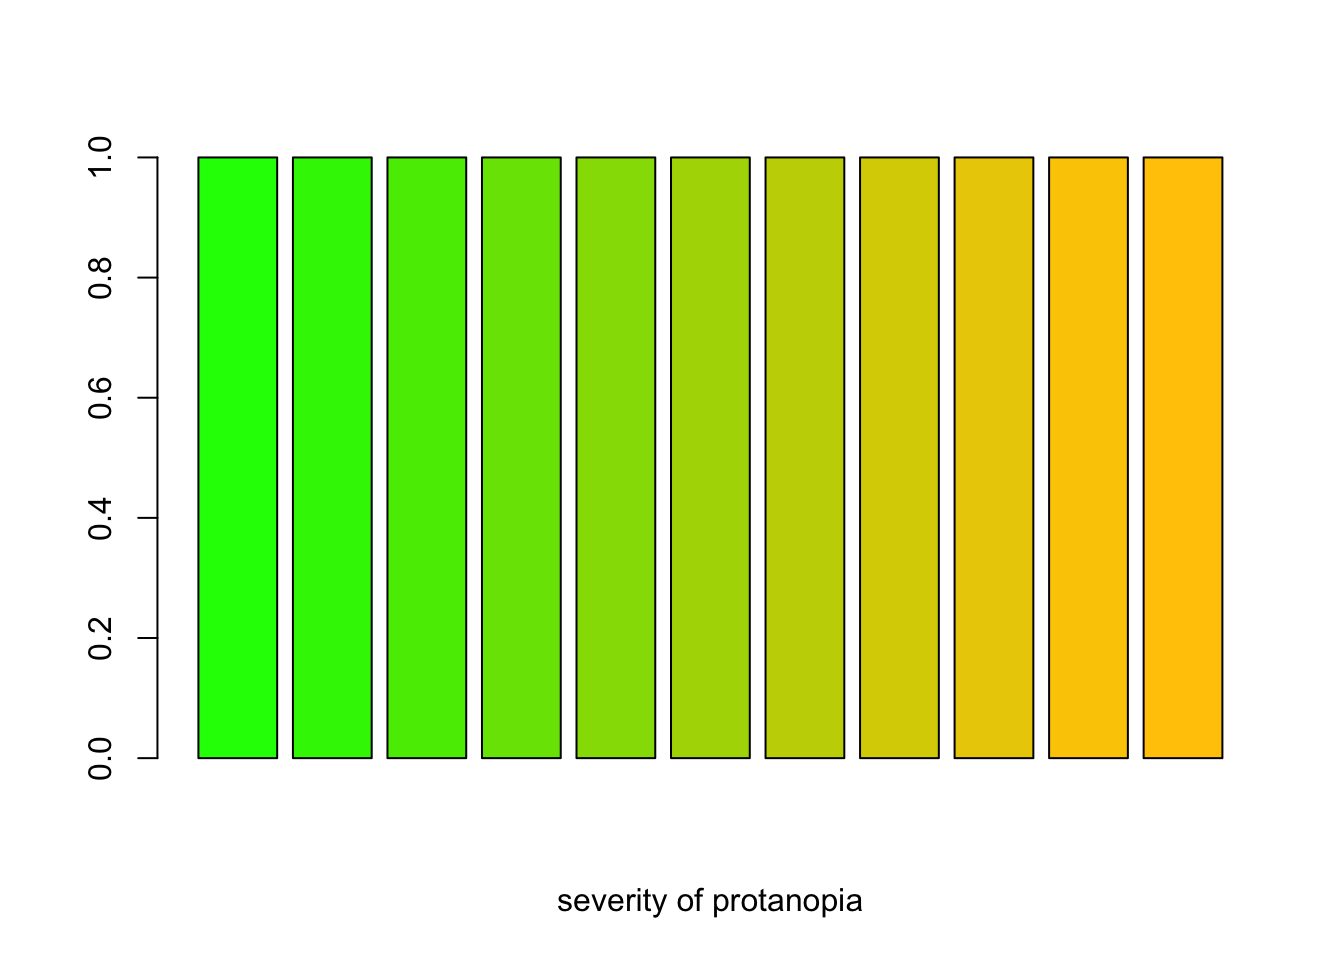 A barplot demosntrating how R’s color ‘green’ looks like for varying severity of protanopia.